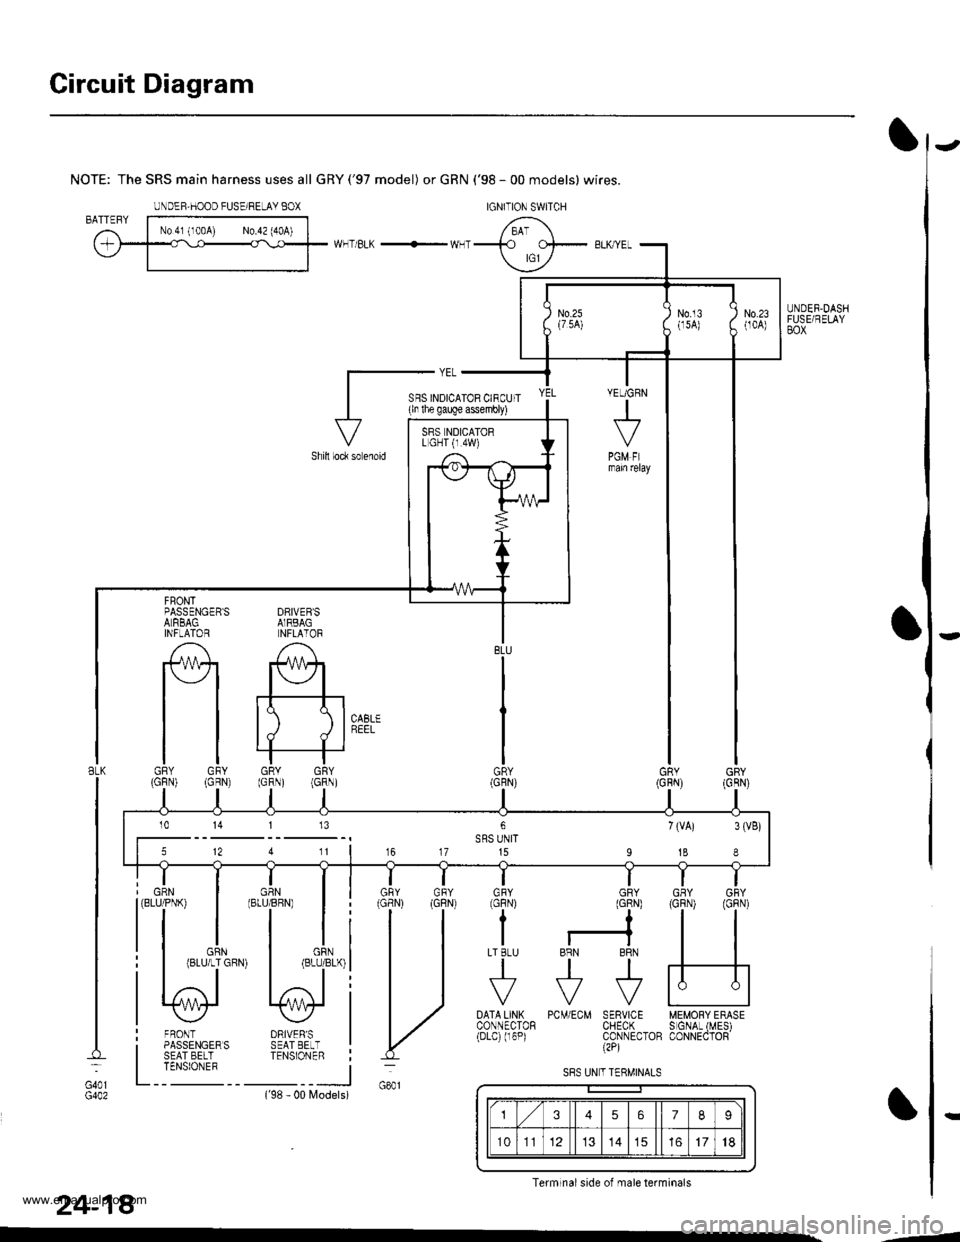 HONDA CR-V 1998 RD1-RD3 / 1.G Workshop Manual 
Circuit Diagram
UNDER.DASHFUSE/RELAYBOX
NOTE: The SRS main harness uses all GRY(97 model) or GRN (98 - 00 models) wires.
WHT/BLK -- WHT
DRIVEBSAIRBAGNFLATOR
A
#+
tt tll./ d I
GRY GRY(GRN) (GRN)
F